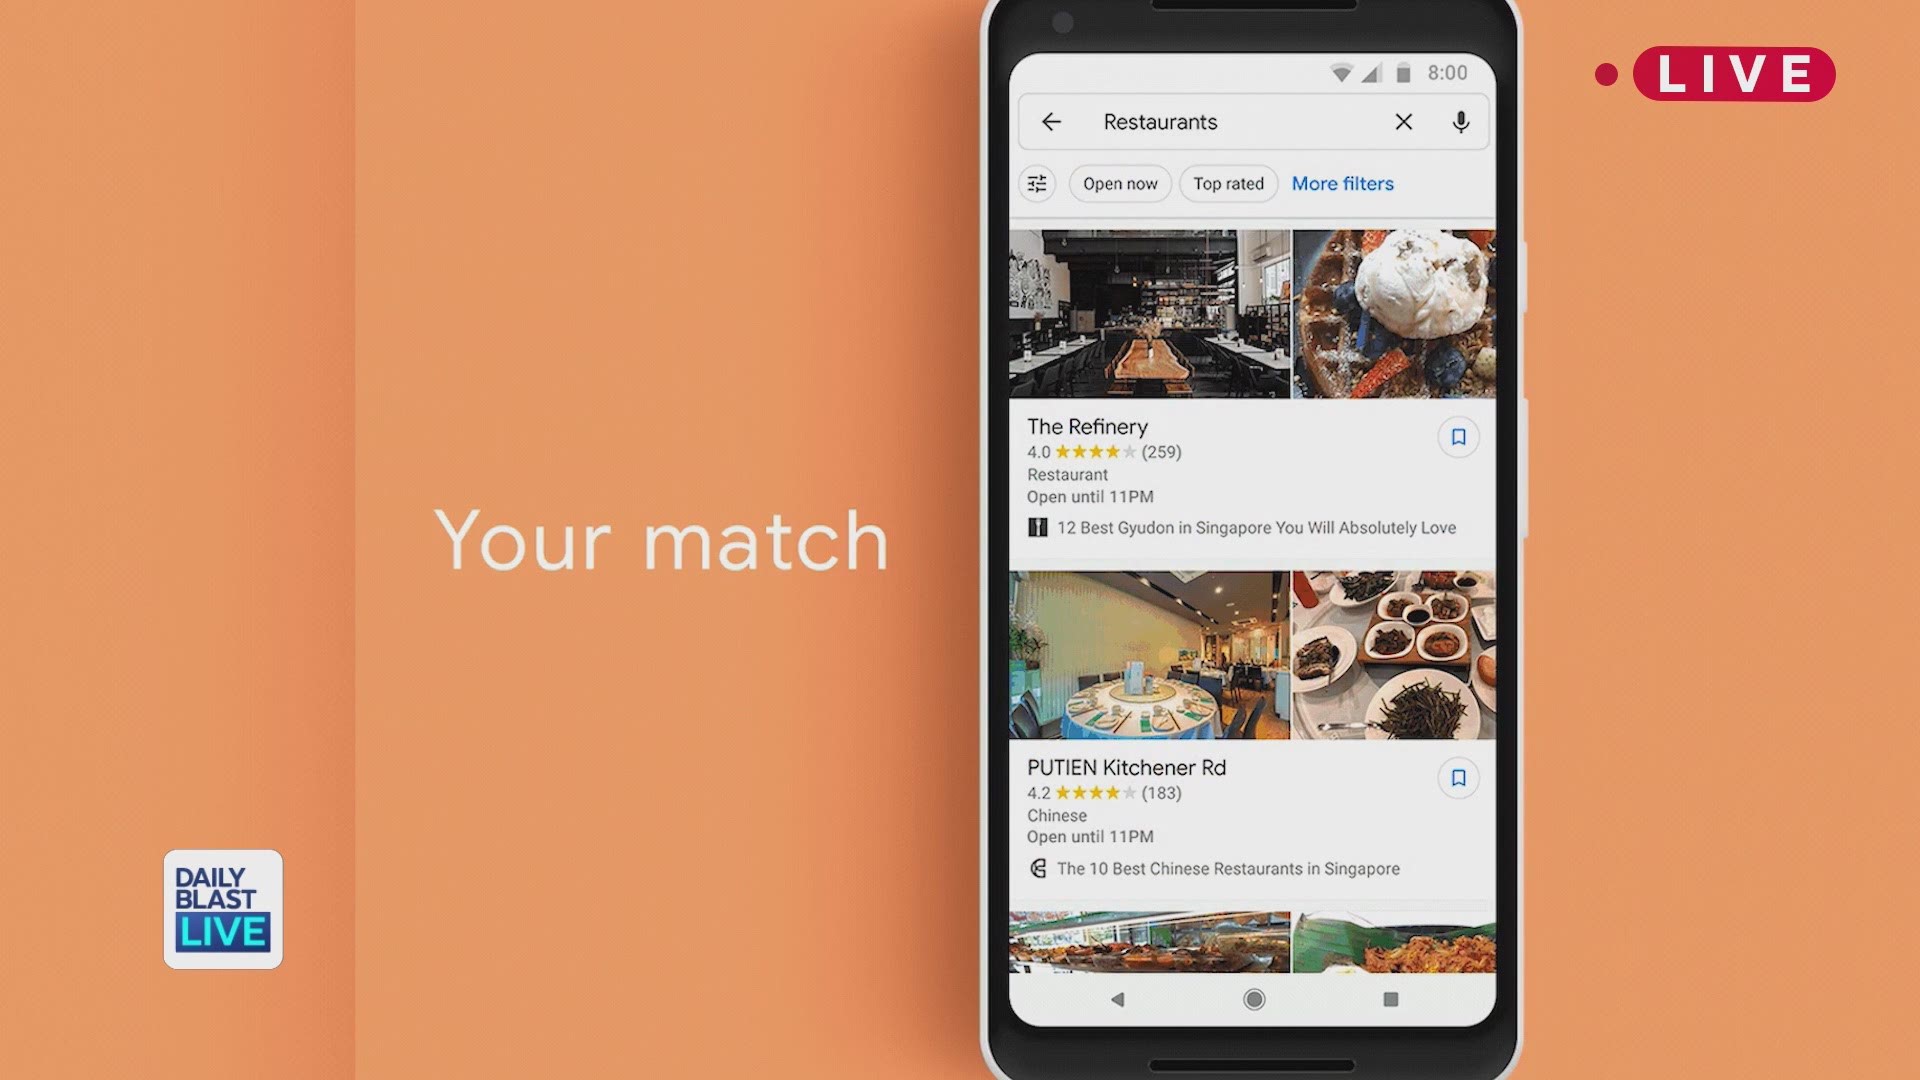 Choosing where to go for dinner can seem like an impossible struggle, but GoogleMaps is hoping to change that. With a brand new string of features on their platform, GoogleMaps is offering the customization you are used to seeing on dating apps or music s